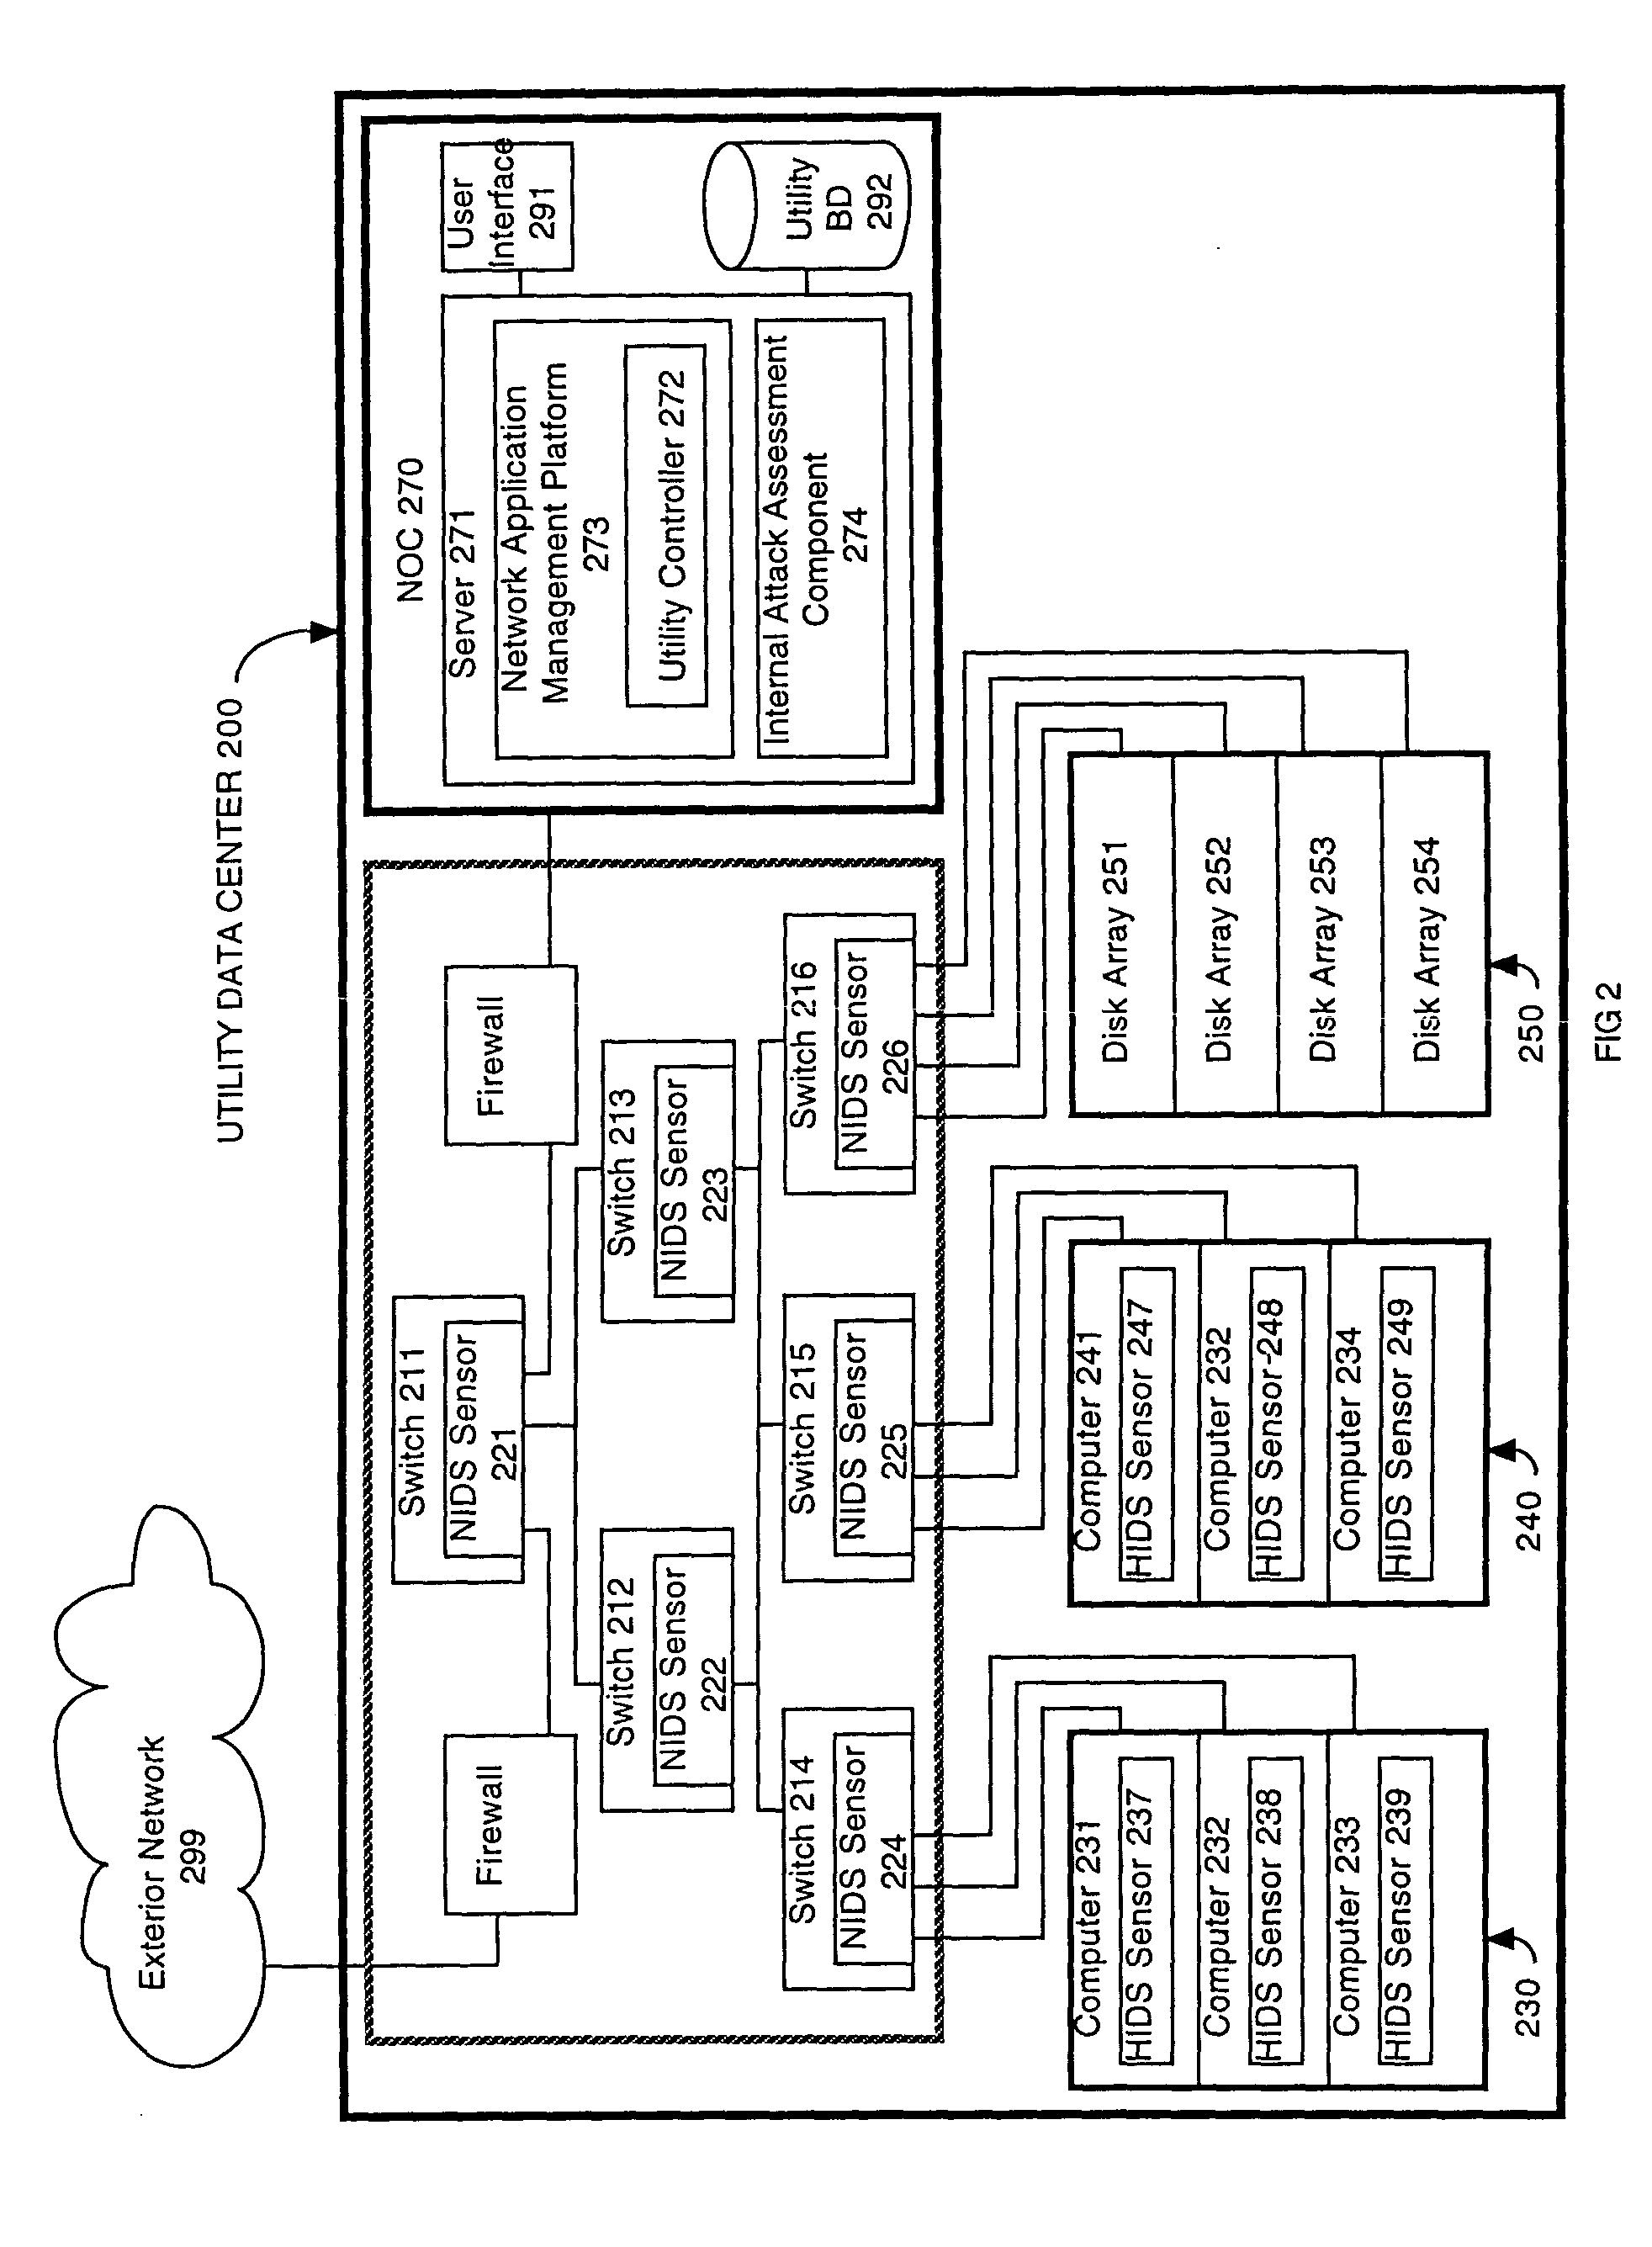 Security intrusion mitigation system and method